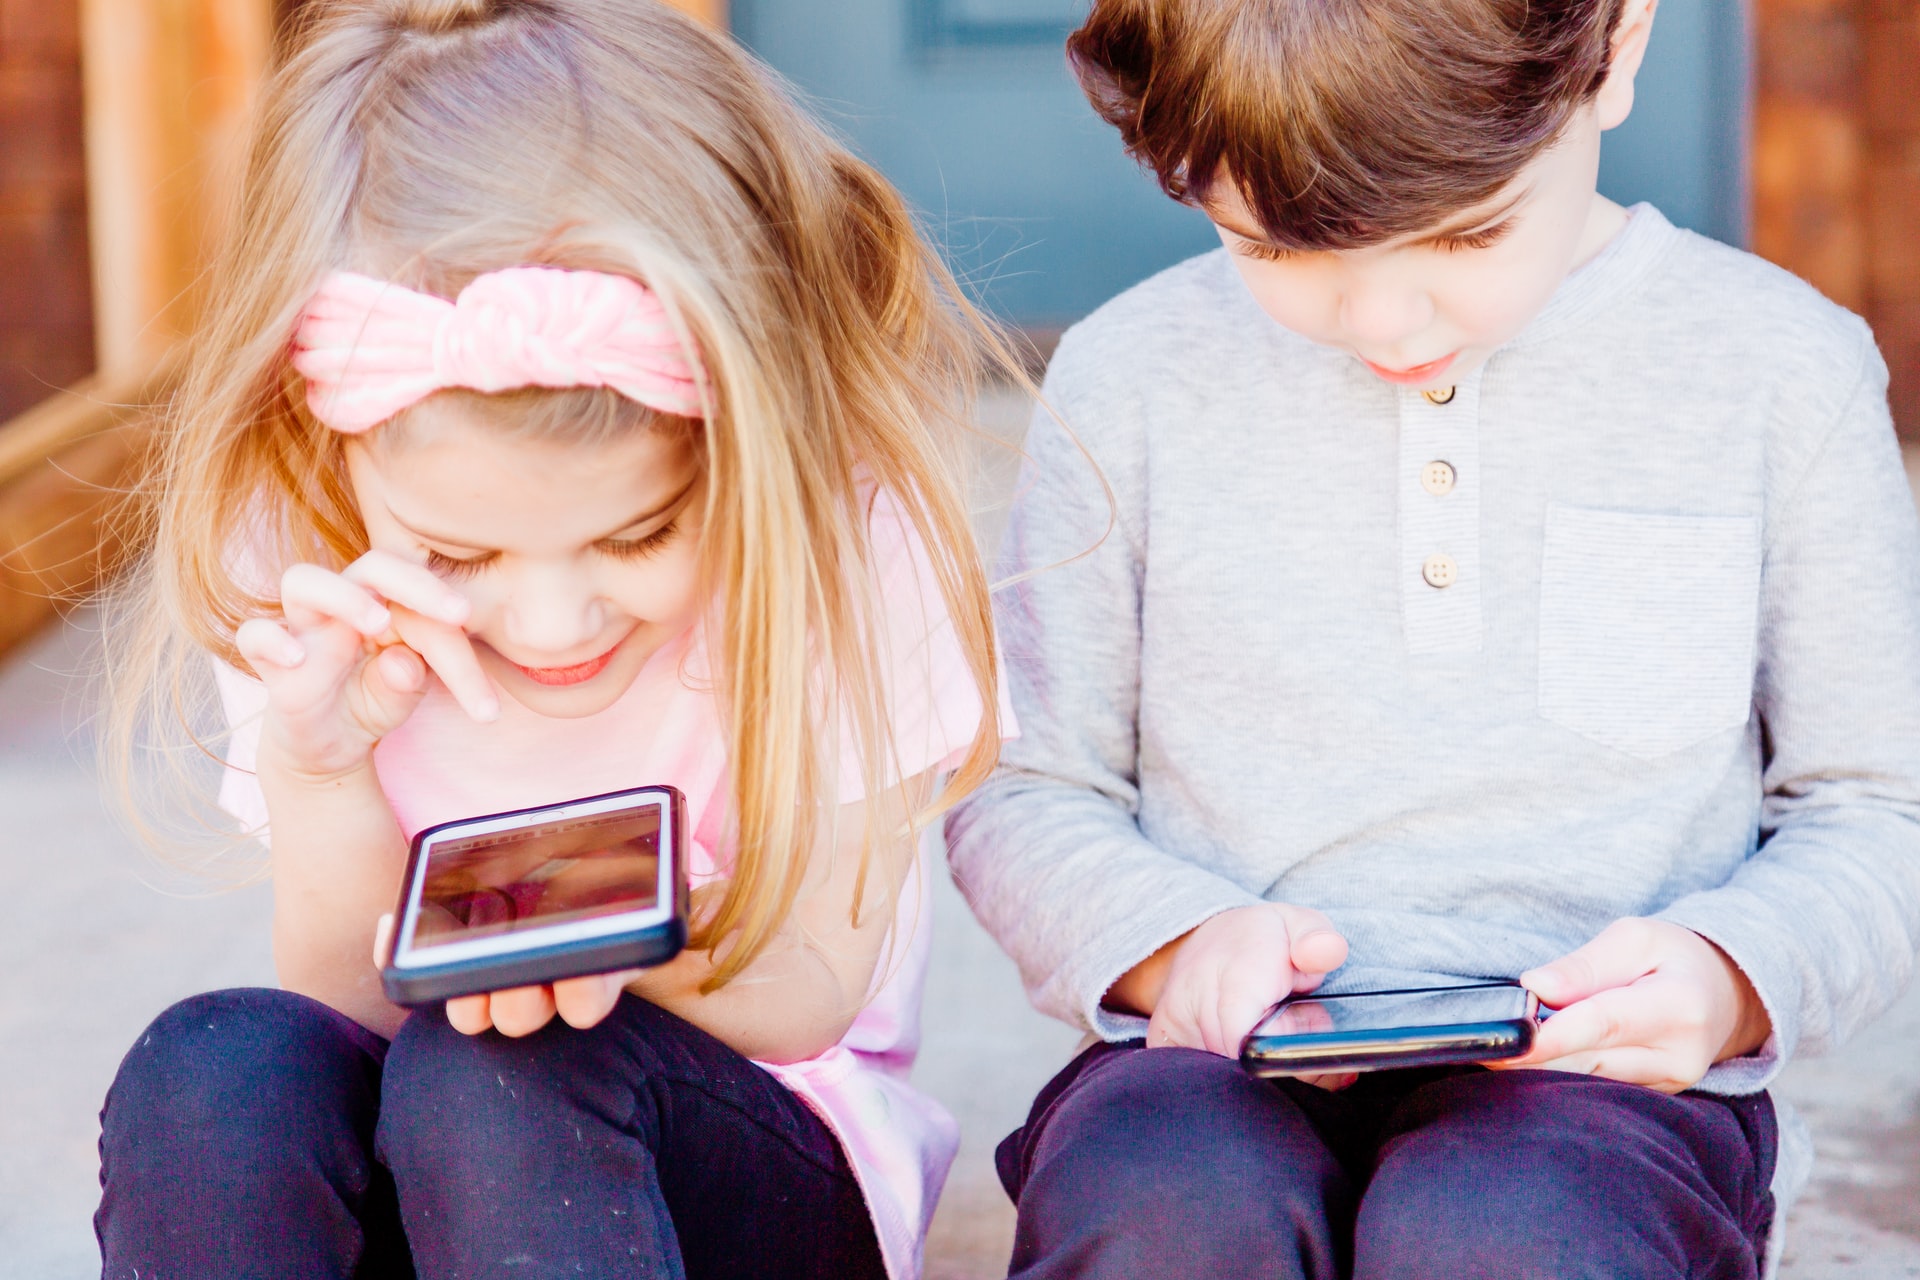 Giving Your Child a Smartphone is “Like Giving Them Drugs” Says Top Addiction Expert